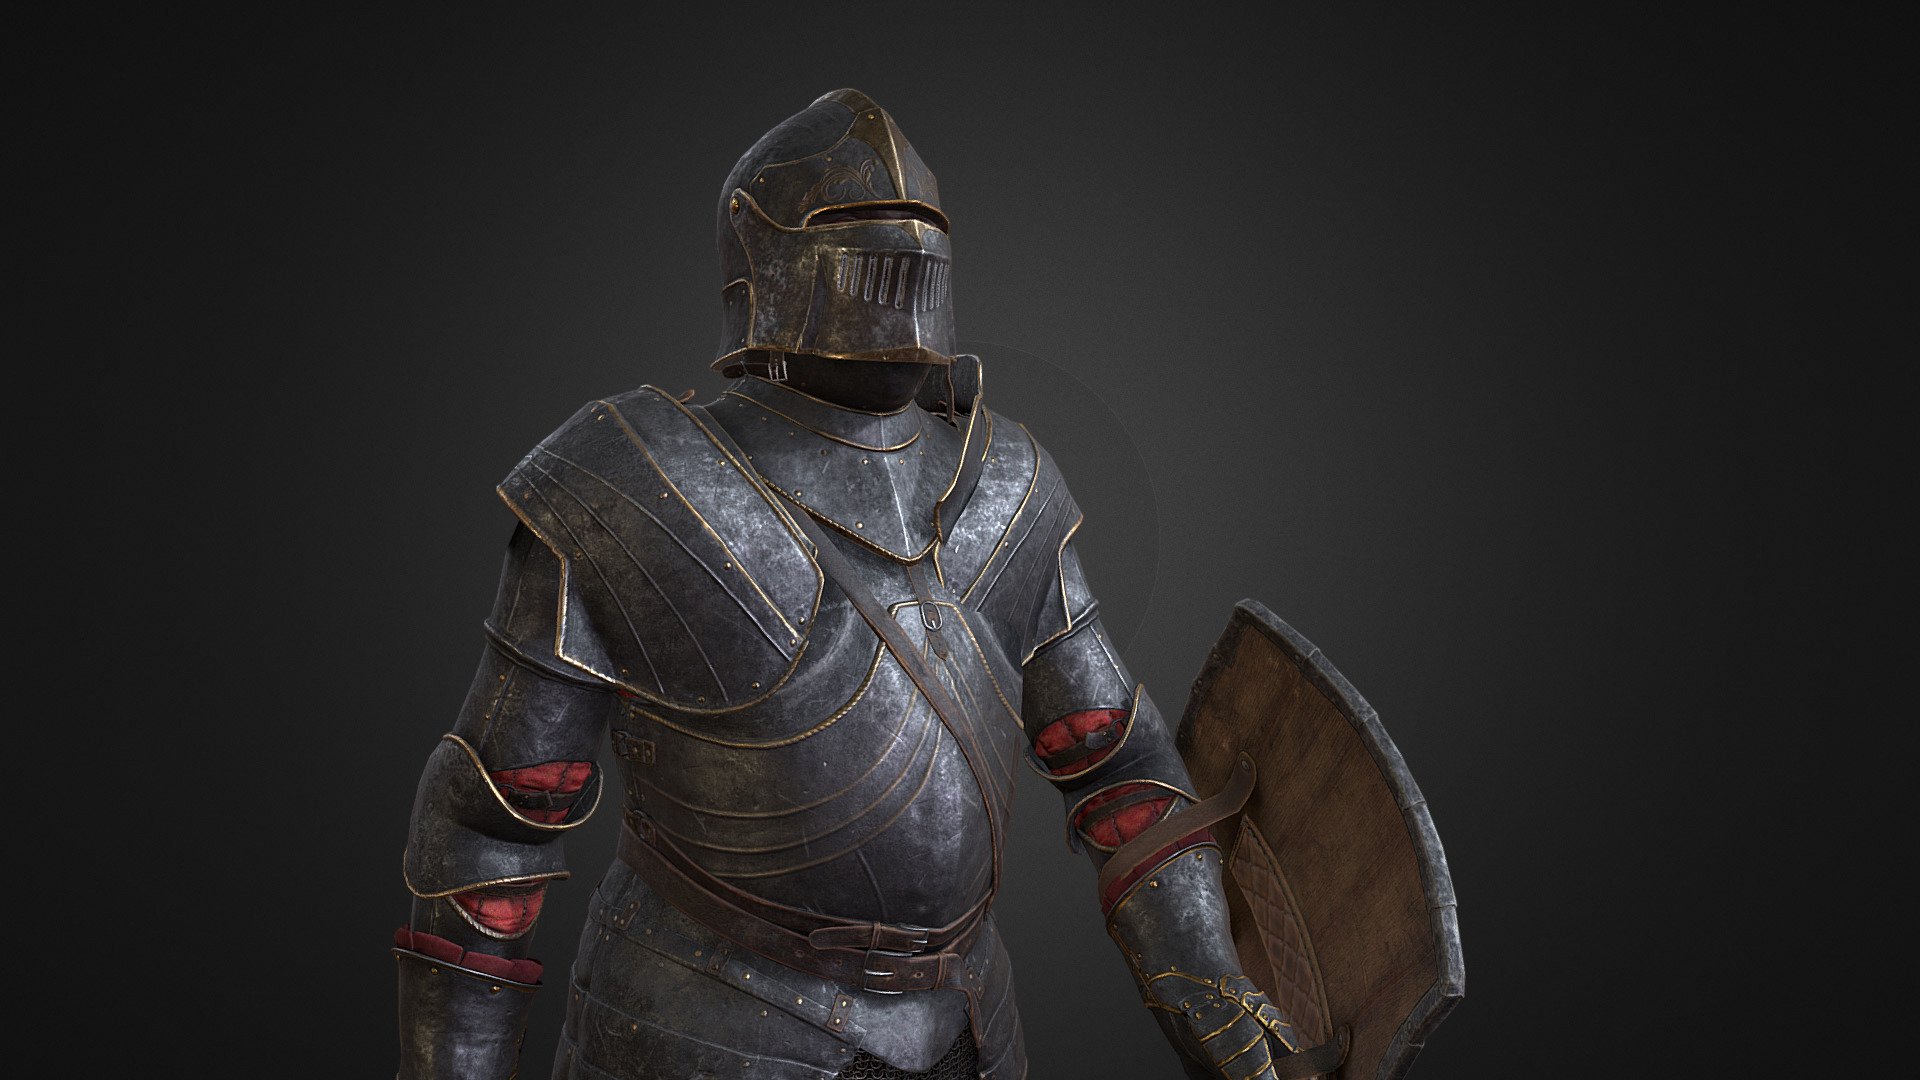 Video



The Medieval Knight pack comes with a lot of assets to create a variety of Medieval soldiers.

All materials in Unreal can be adjusted, color/specular/roughness and metallics can be adjusted with a mask. You can also add a logo.



Files: Unity(2021.3), Unreal(4.7/5.0).

Number of character parts: 65 (Weapon: 8, Upper Body: 10, Lower Body: 9, Helmets: 23, Gloves: 6, Body: 9)

Vertex counts of characters: ~6.500-27.500

Number of Textures: ~190 (Body - 12, Gloves - 20, Helmets - 62, Upper body - 36, Lower body - 36, Weapon - 21)

Texture Resolutions: 1K, 2K, 4K

Rigged: Yes

Rigged to Epic skeleton: Yes( IK bones are included)

Sockets: HelmSocket, VisorSocket, Weapon_rSocket, Weapon_lSocket, Shield_Socket, Buckler_Socket,PelvisSocket

Animated: No Animations included
 - Medieval Knight Demo - 3D model by Viverna (@Viverna_362) 3d model